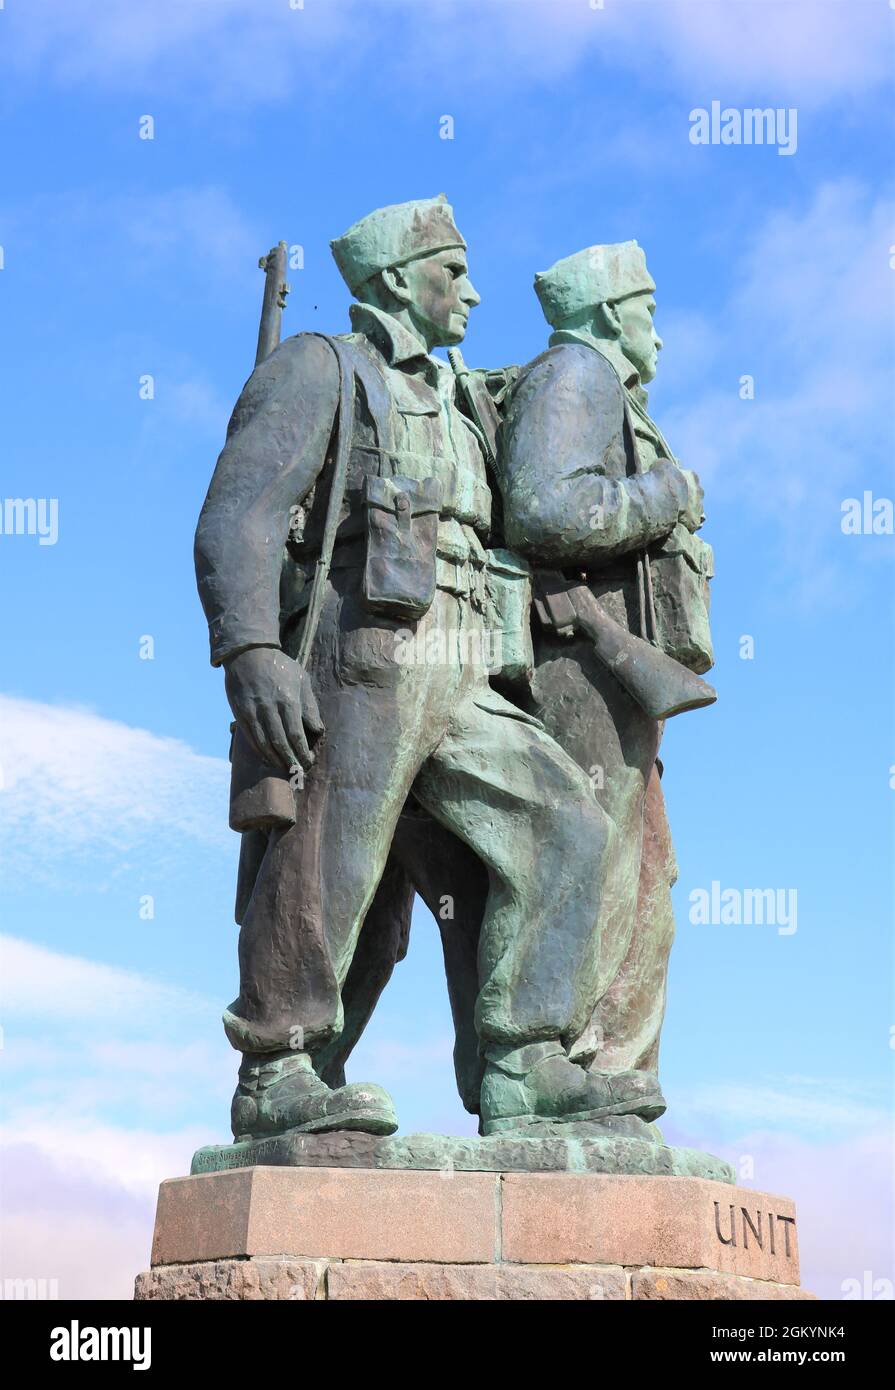 The Commando Memorial, a Category A listed monument in Lochaber,  dedicated to the men of the original British Commando Forces raised during WWII. Stock Photo